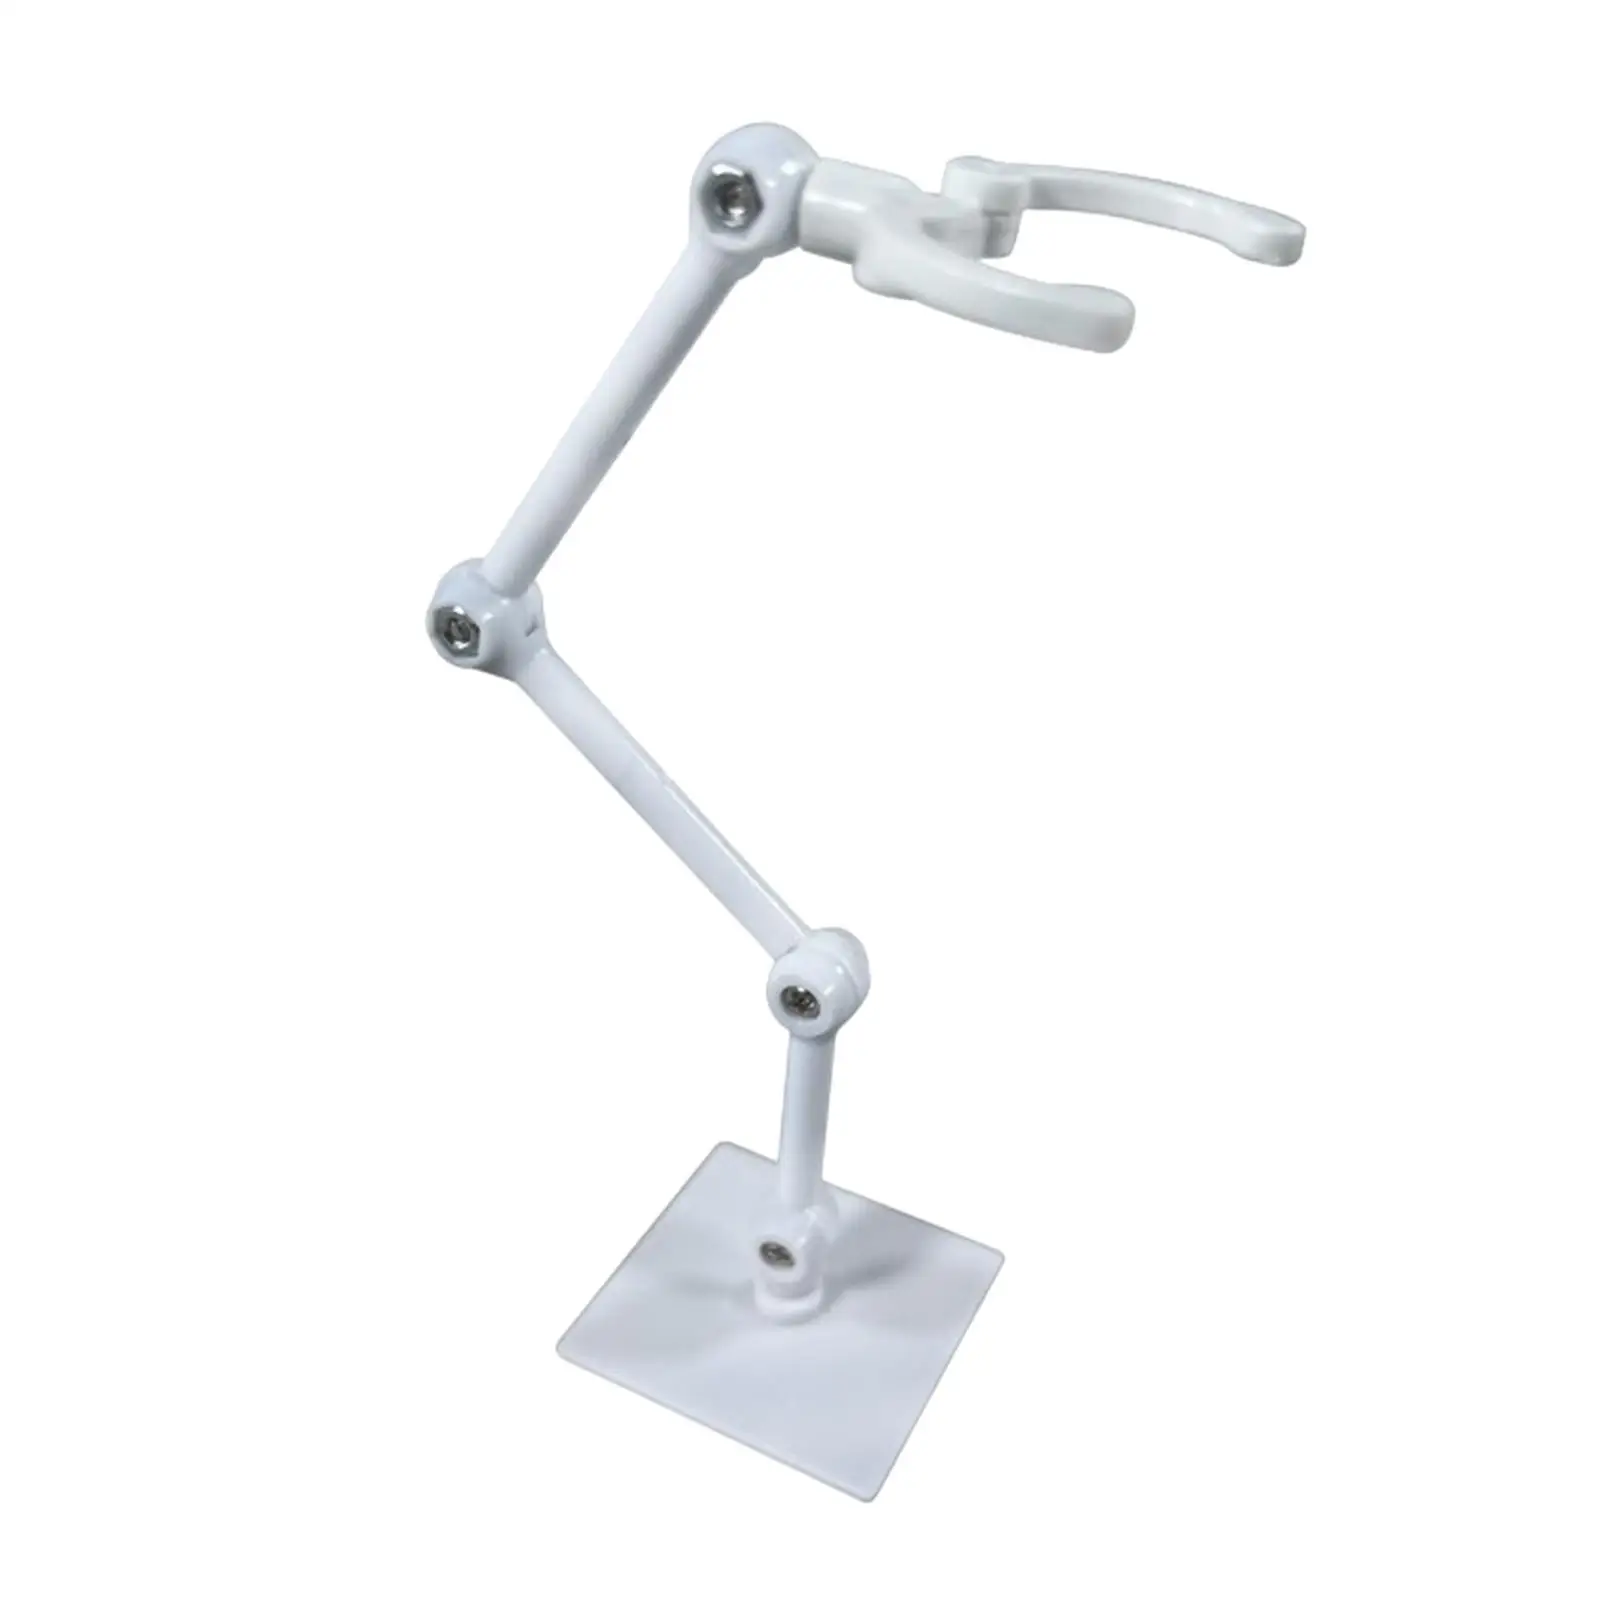  Doll Model Bracket Flexible Sturdy Display Stand for 6inch Model Figures